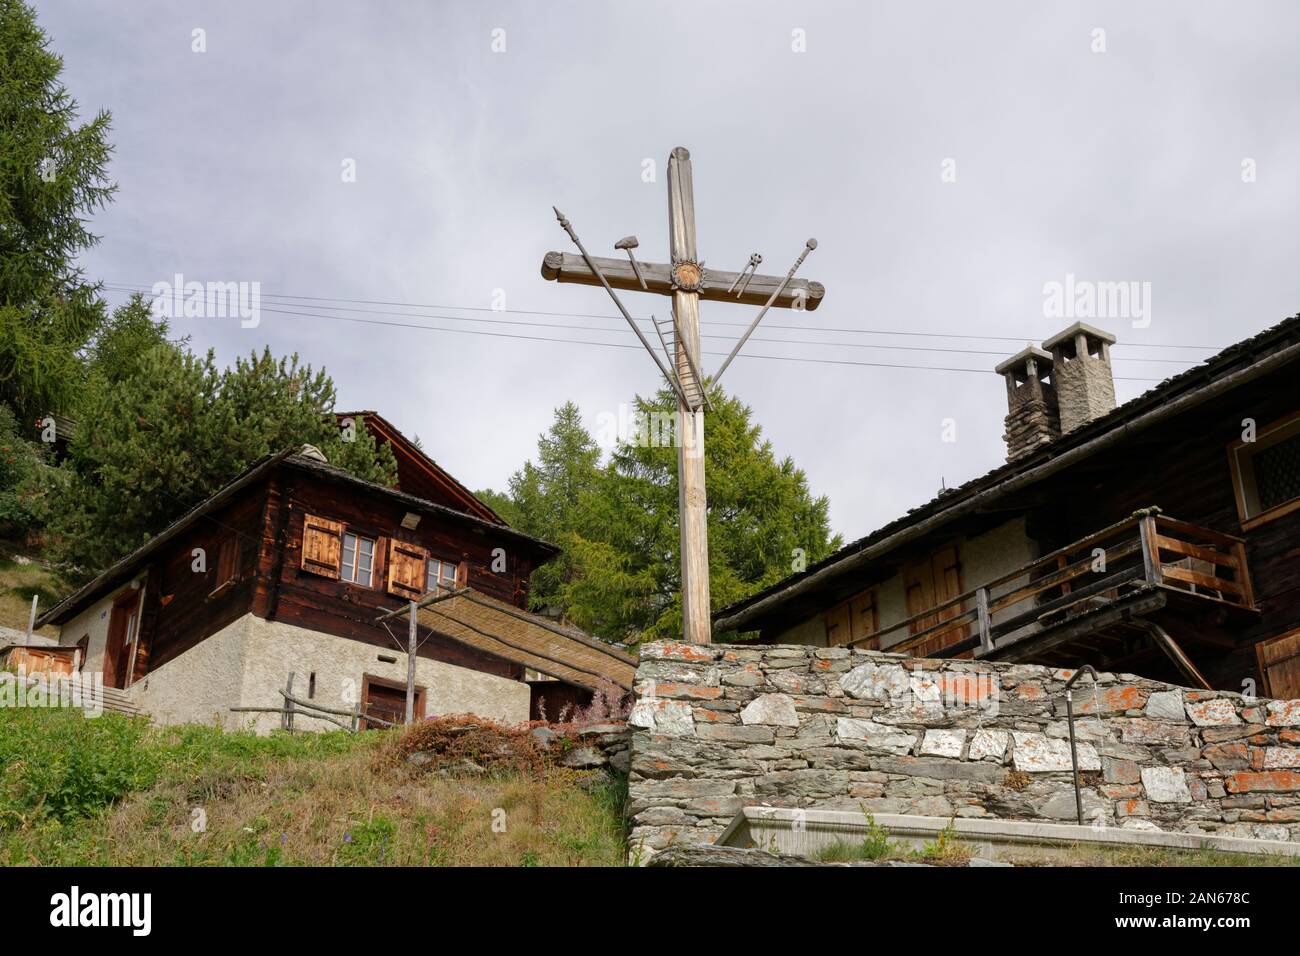 Cross, built in 1930, in the district Tsarine in Chandolin, Val d'Annivers, Canton of Valais, Switzerland Stock Photo